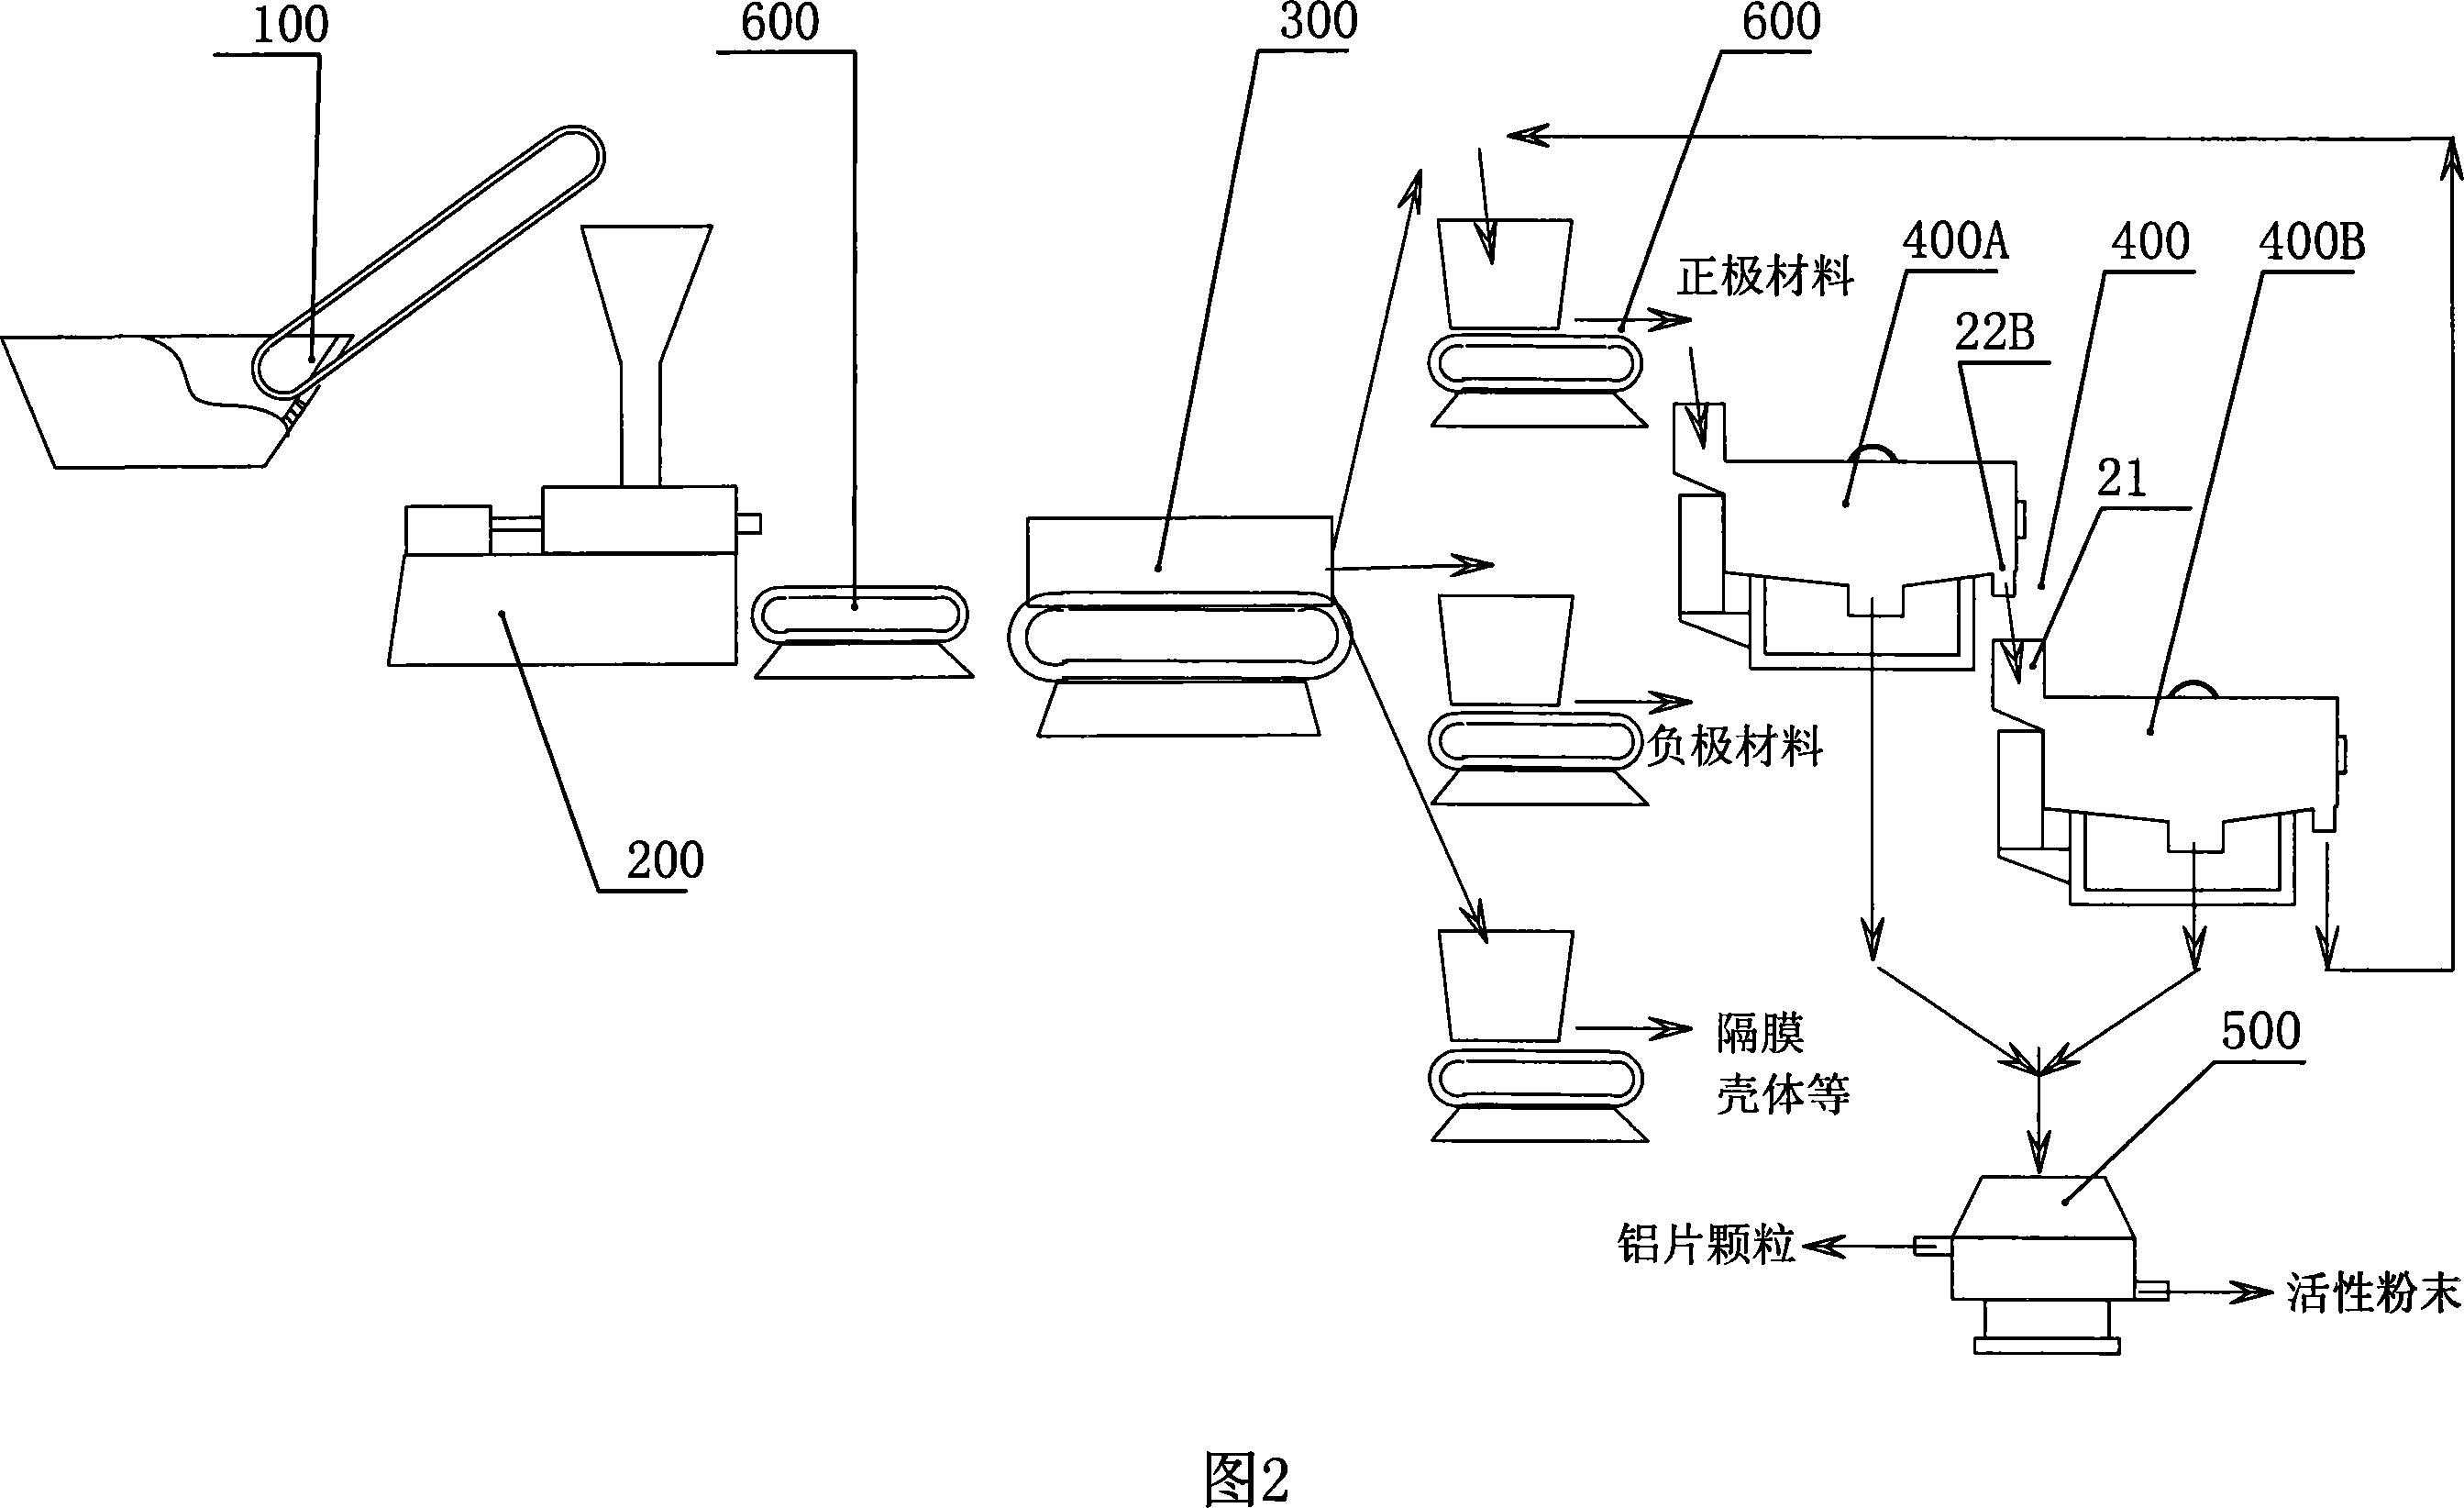 Method of controlling fragmentation and recovery of waste battery and system thereof